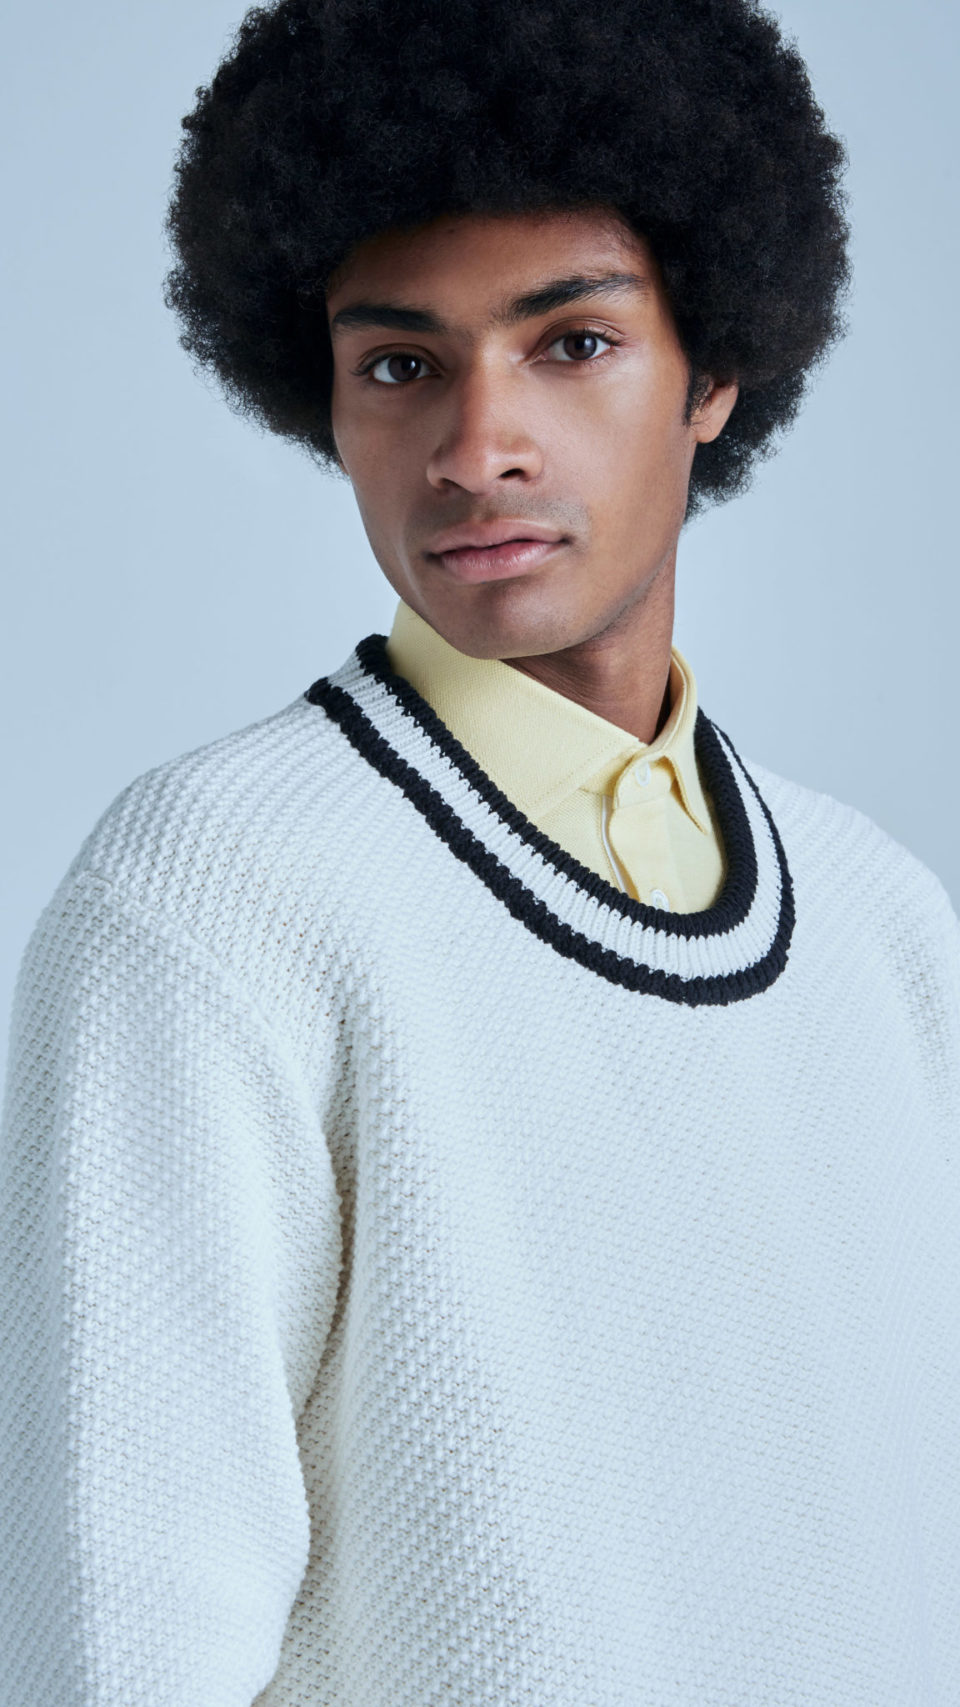 MAR sustainable cotton knit sweater